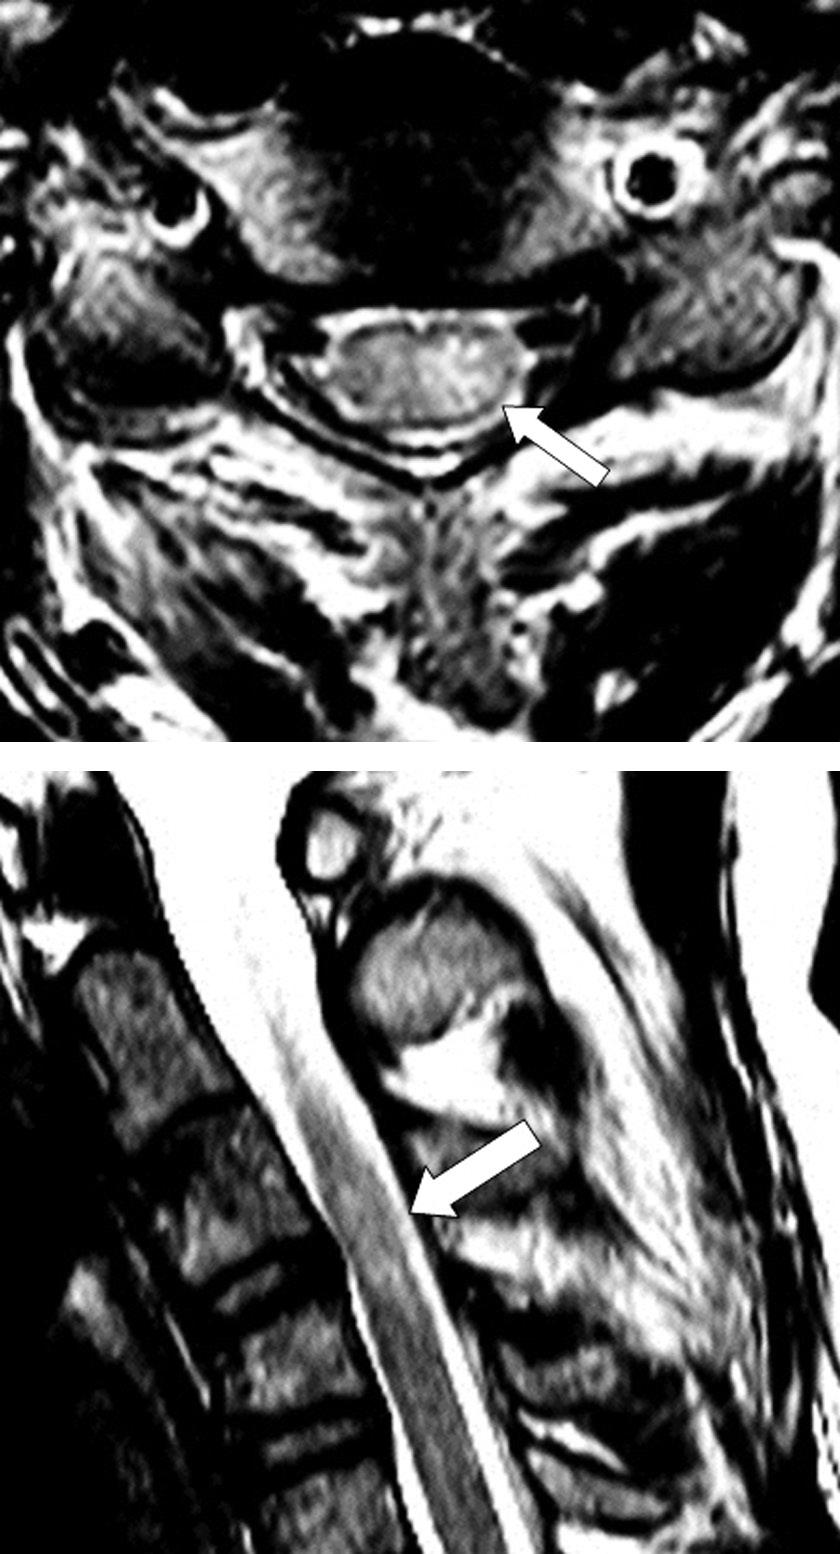 Seung-Pyo Suh et al Volume 24 Number 4 December 31 2017 A B Fig. 3. Computed tomography of the cervical spine.